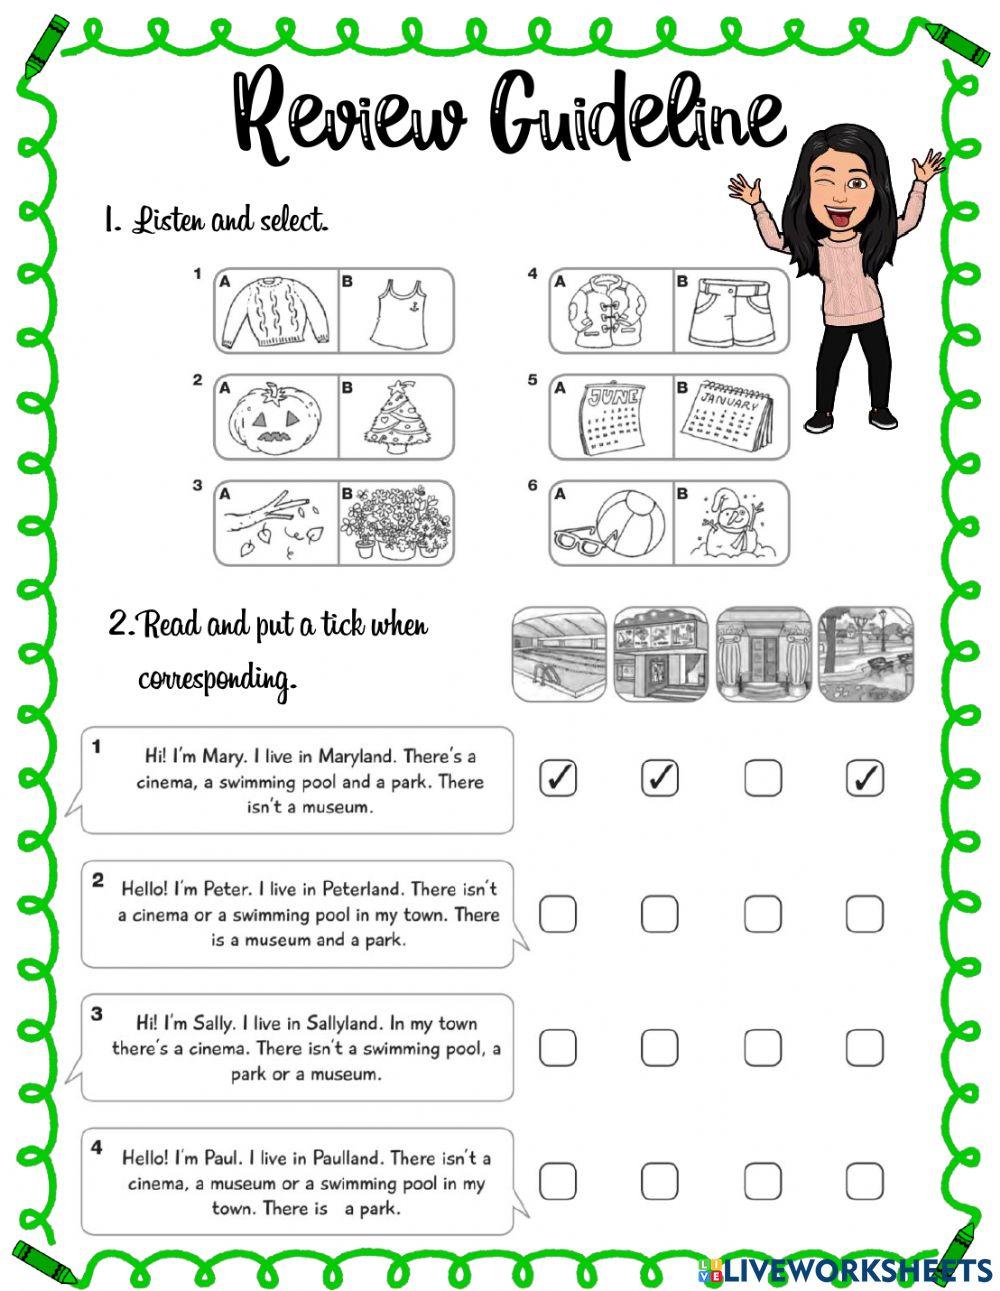 Review Guideline - 5th grade